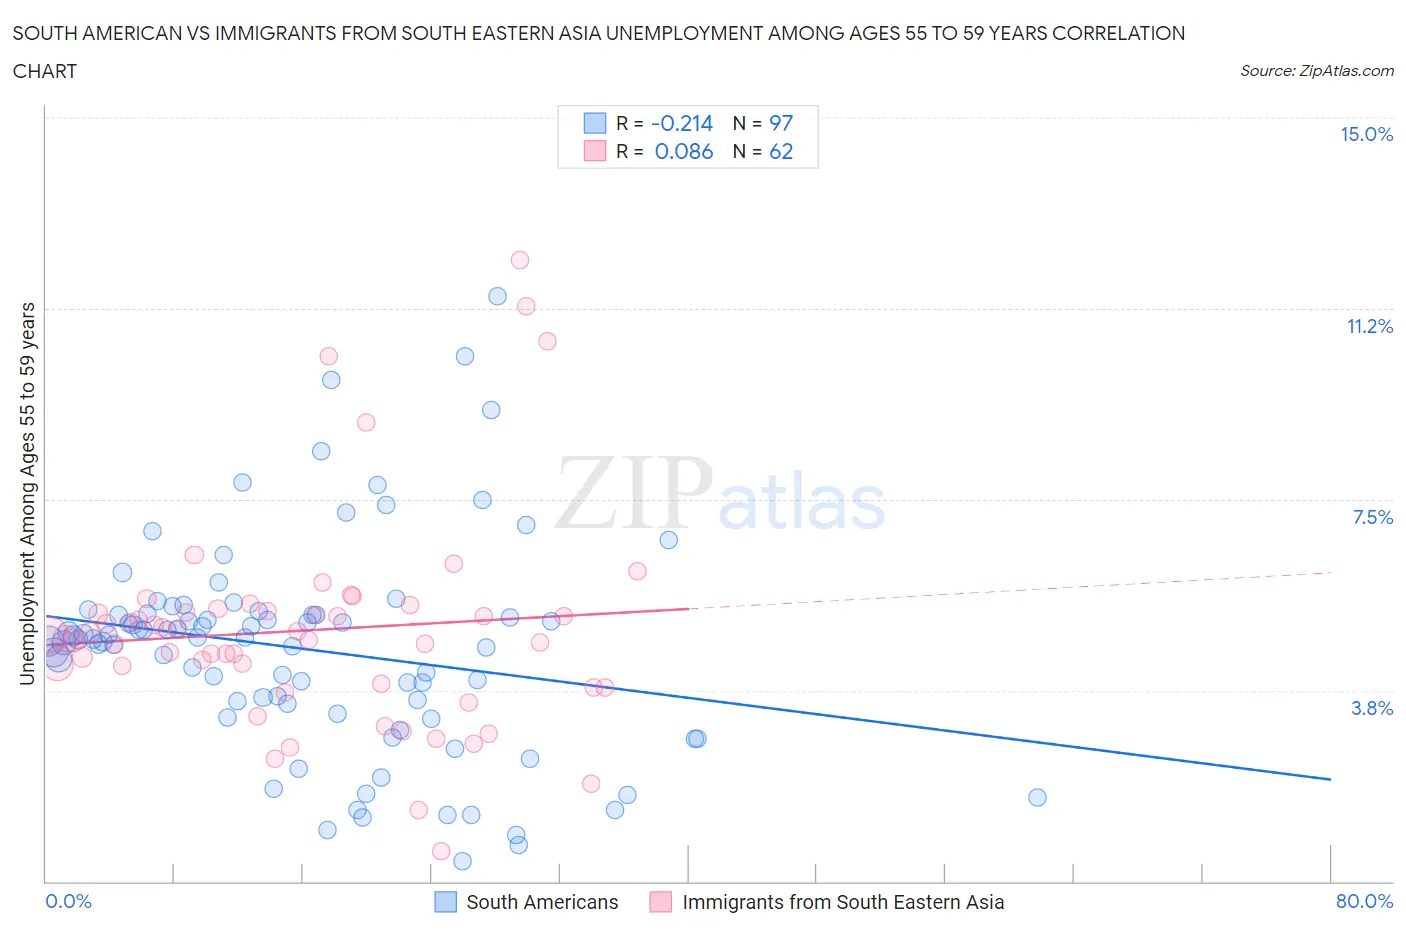 South American vs Immigrants from South Eastern Asia Unemployment Among Ages 55 to 59 years